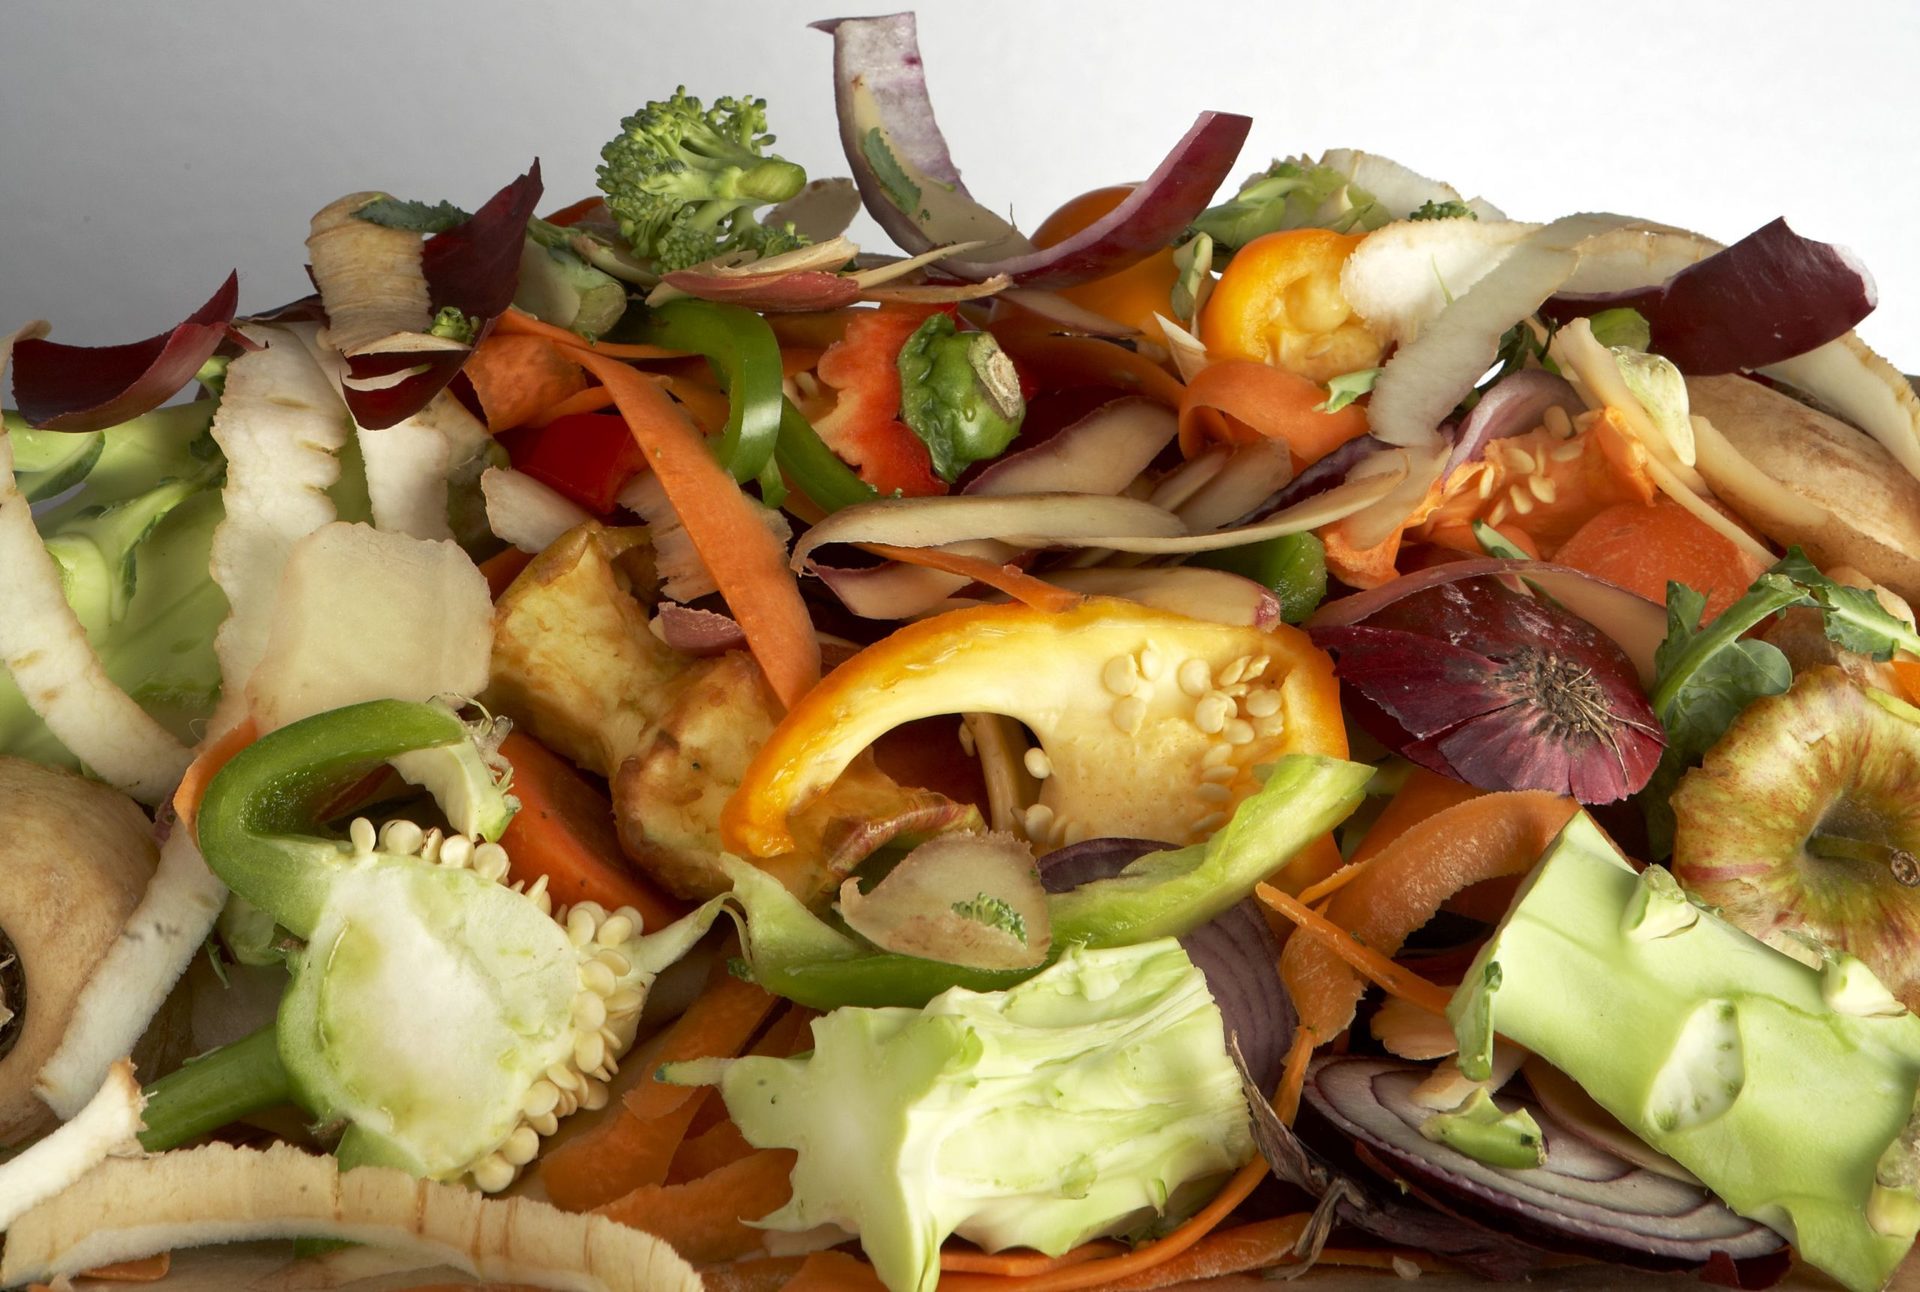 Fundació ENT will start a new H2020 project on the innovative valorisation of organic waste